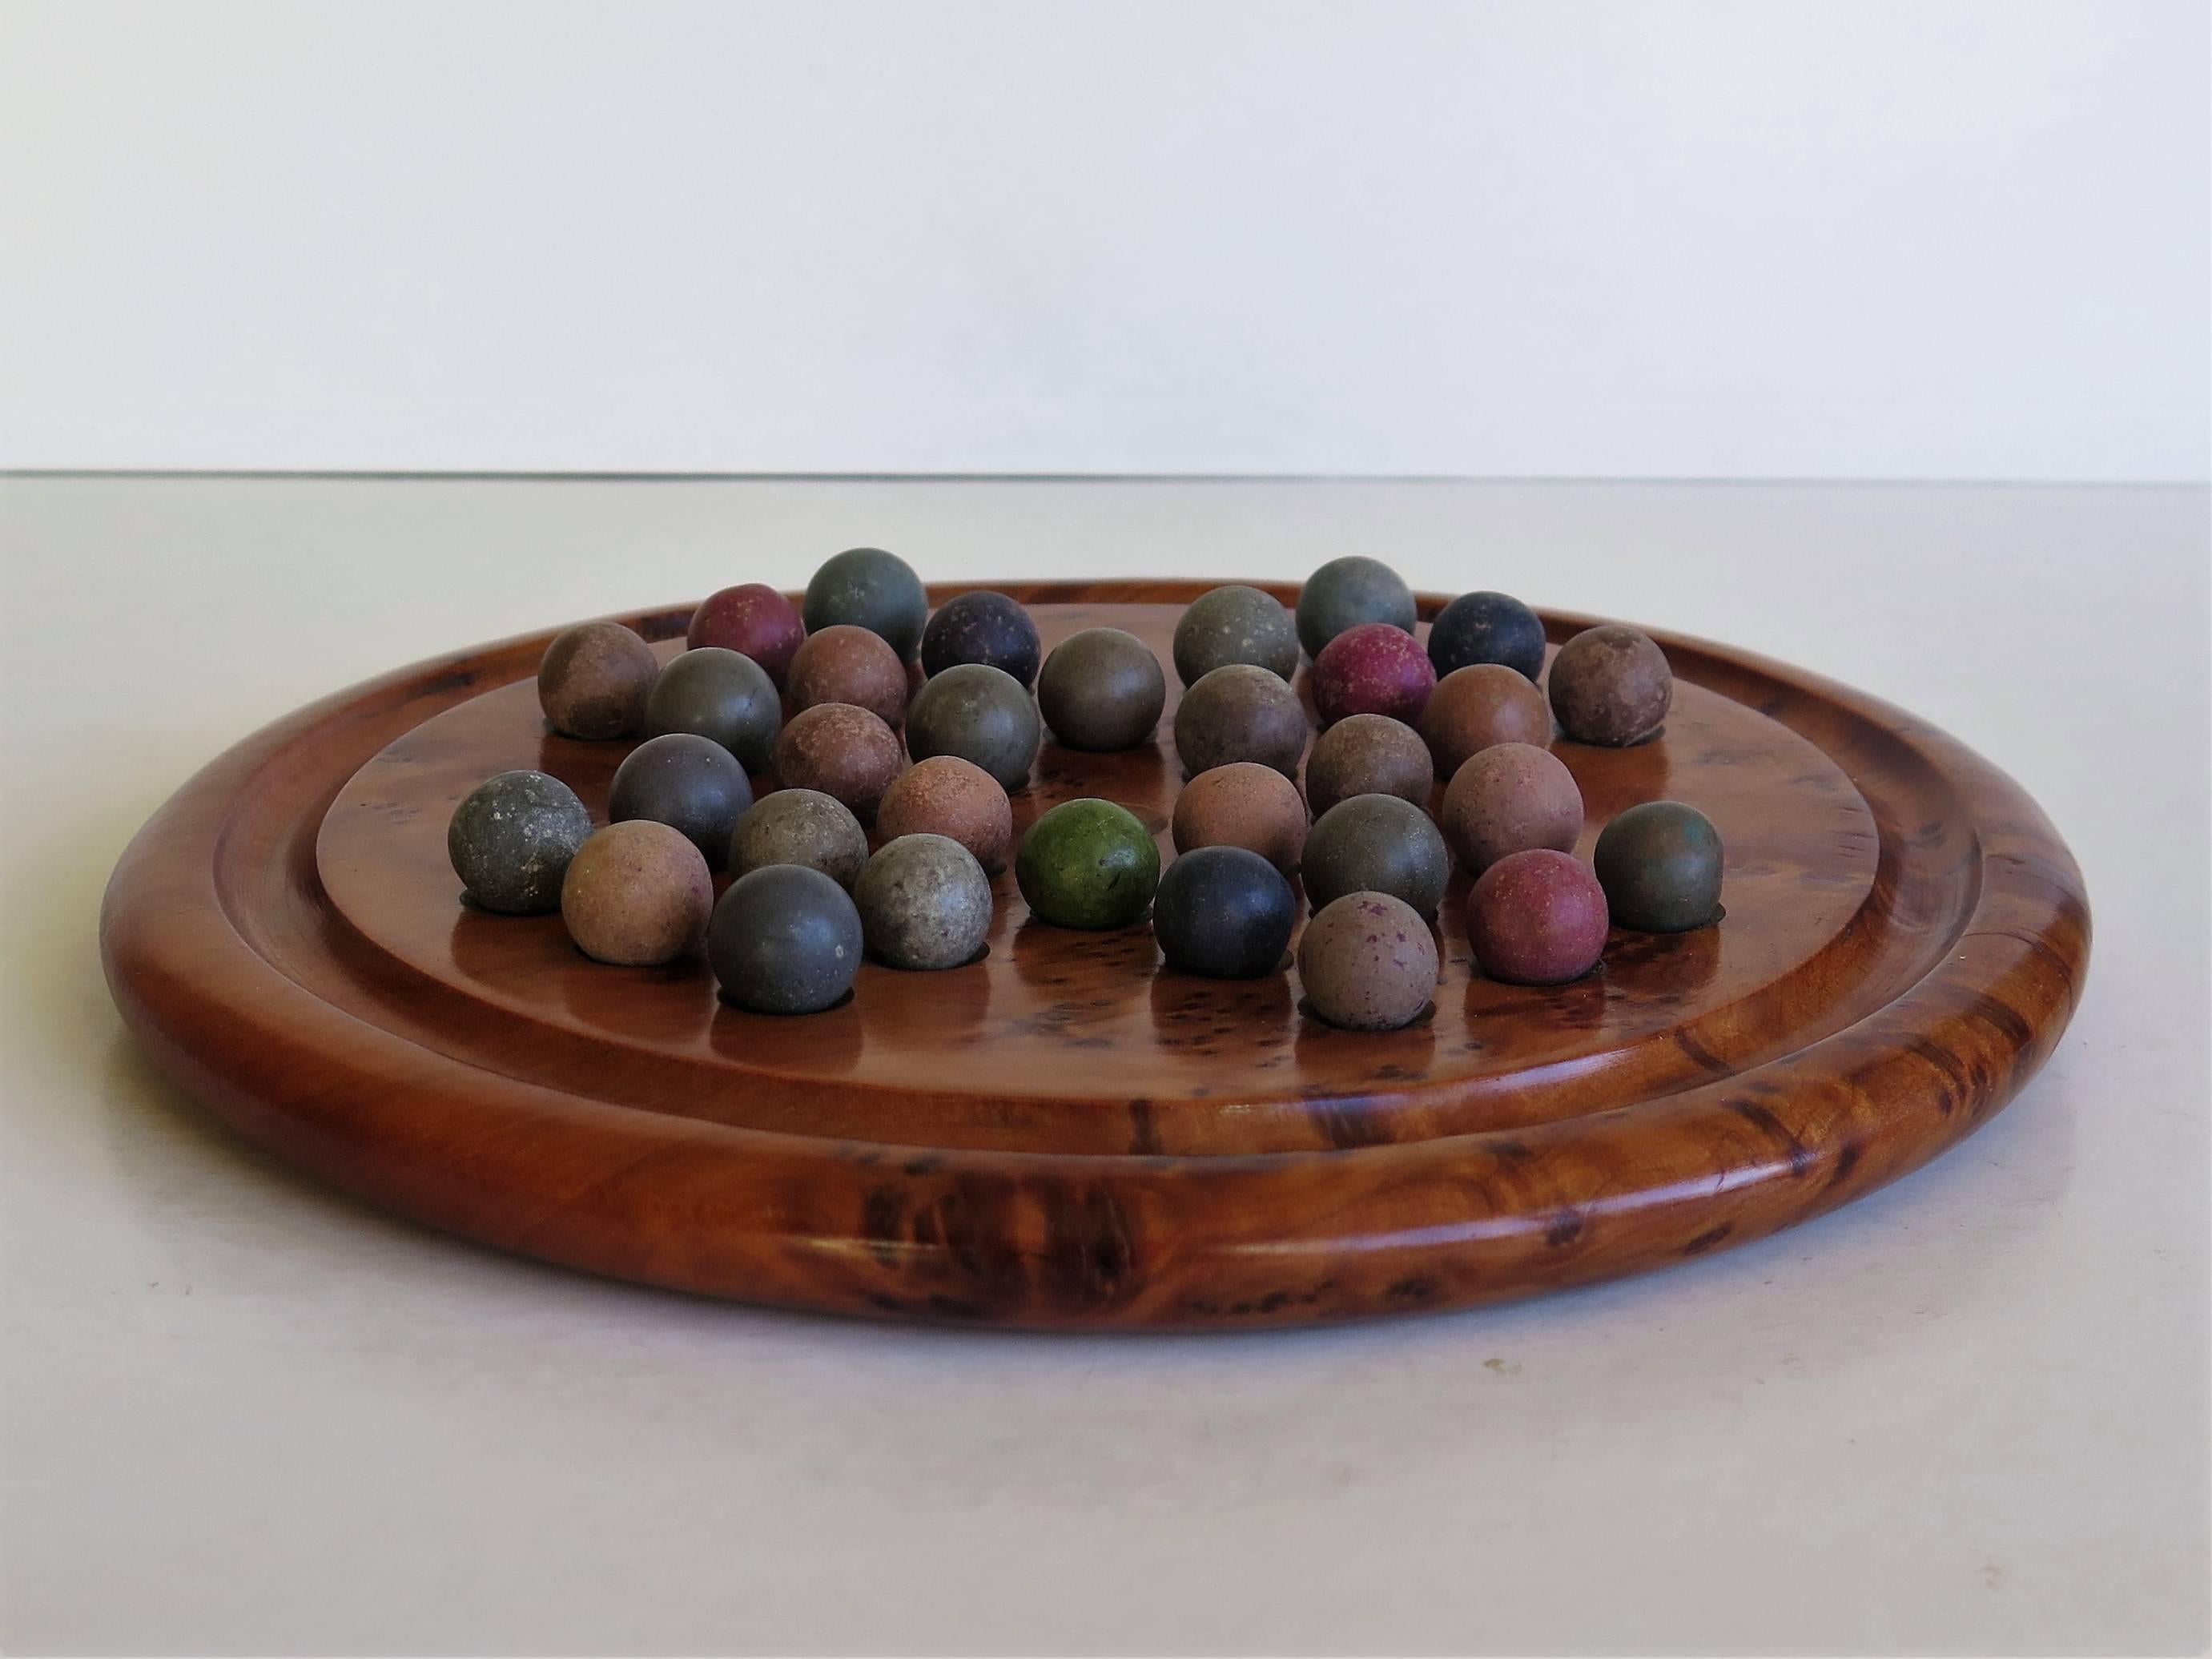 old board game with marbles